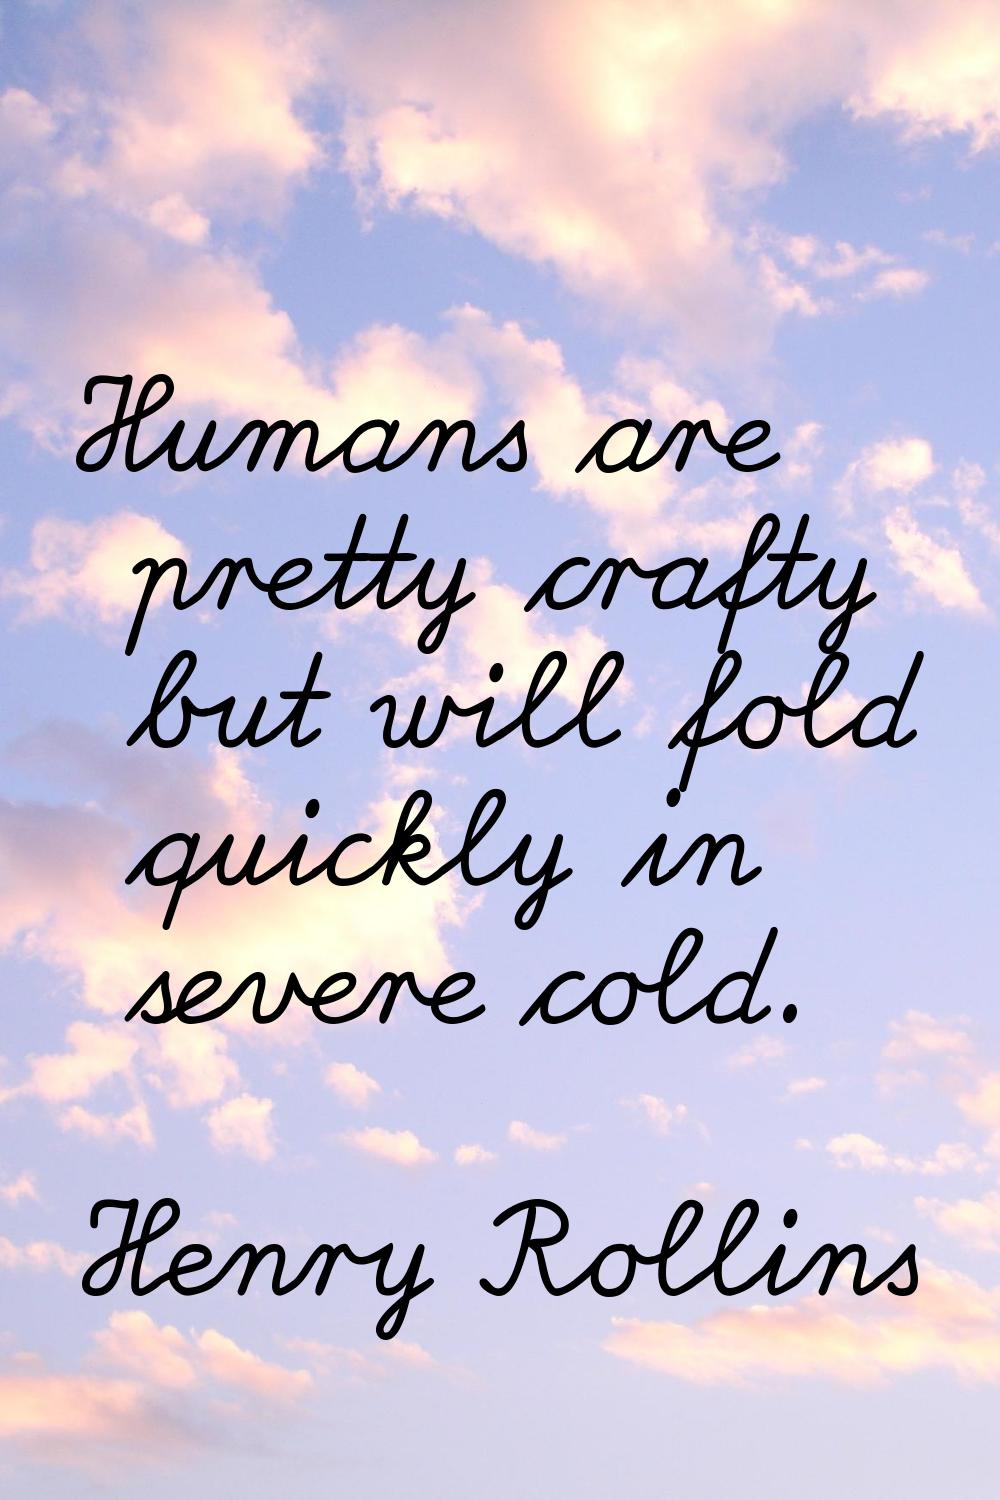 Humans are pretty crafty but will fold quickly in severe cold.